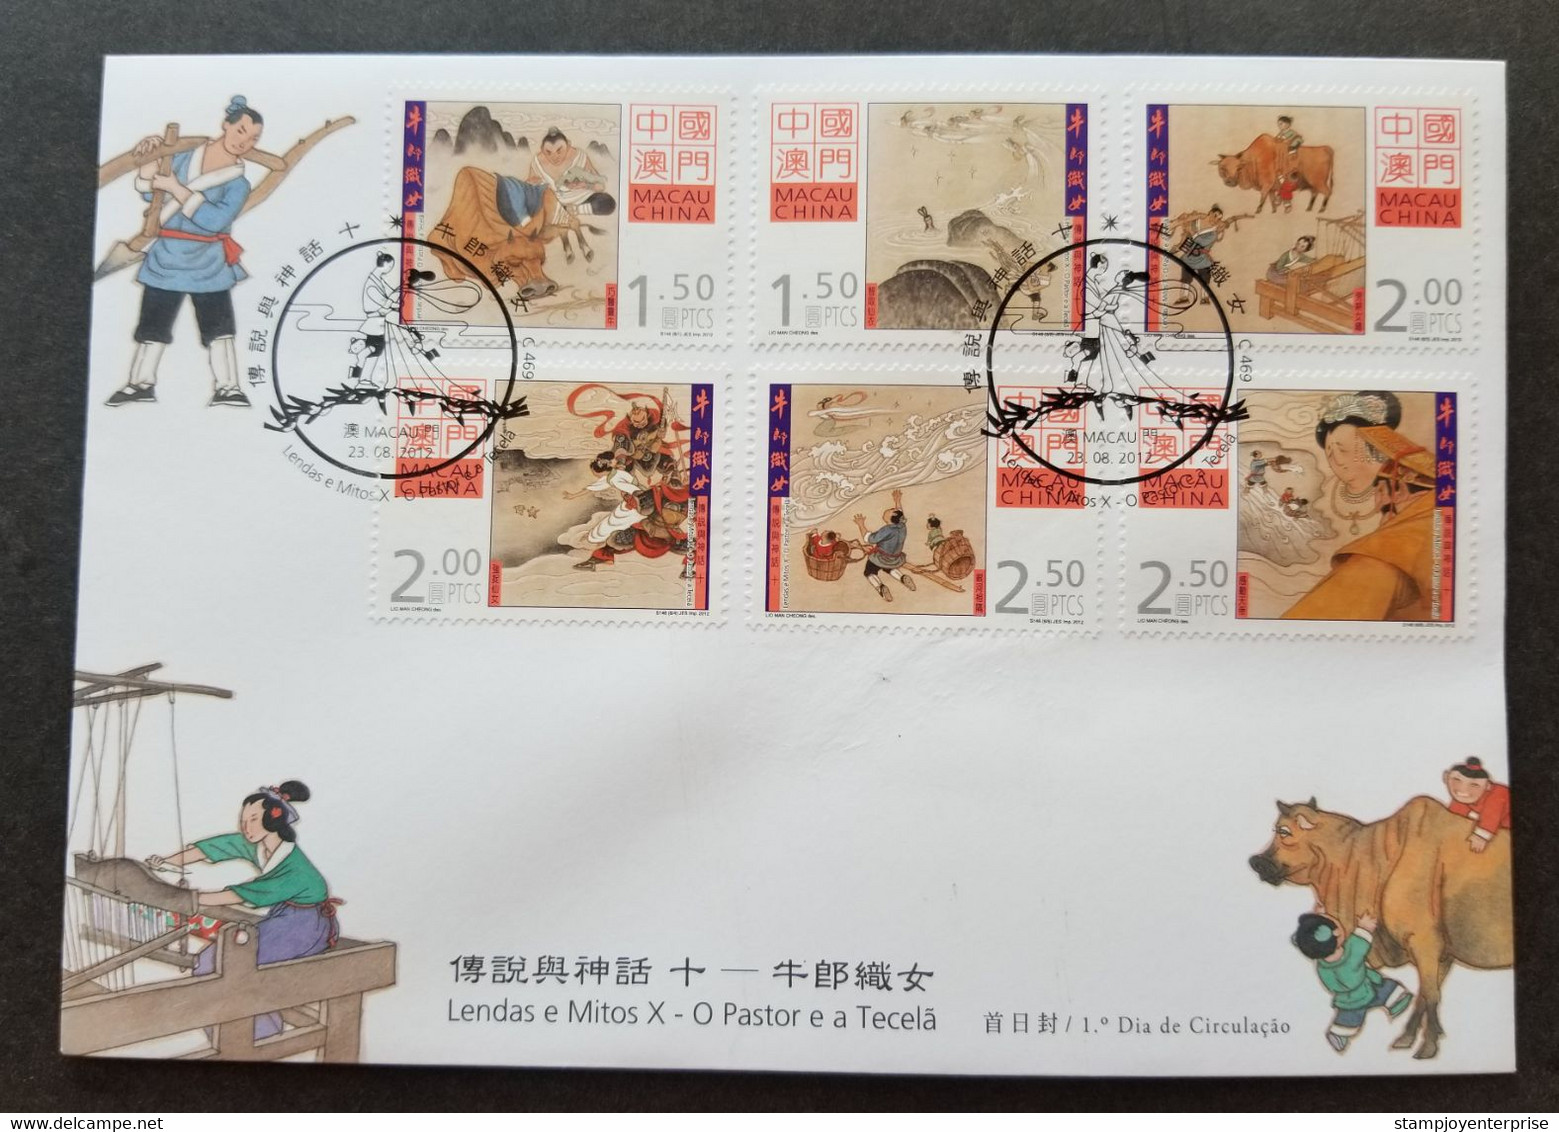 Macau Macao Legends Myths Cowherd Weaving Maid 2012 Tales Cow Ox (FDC) *see Scan - Covers & Documents